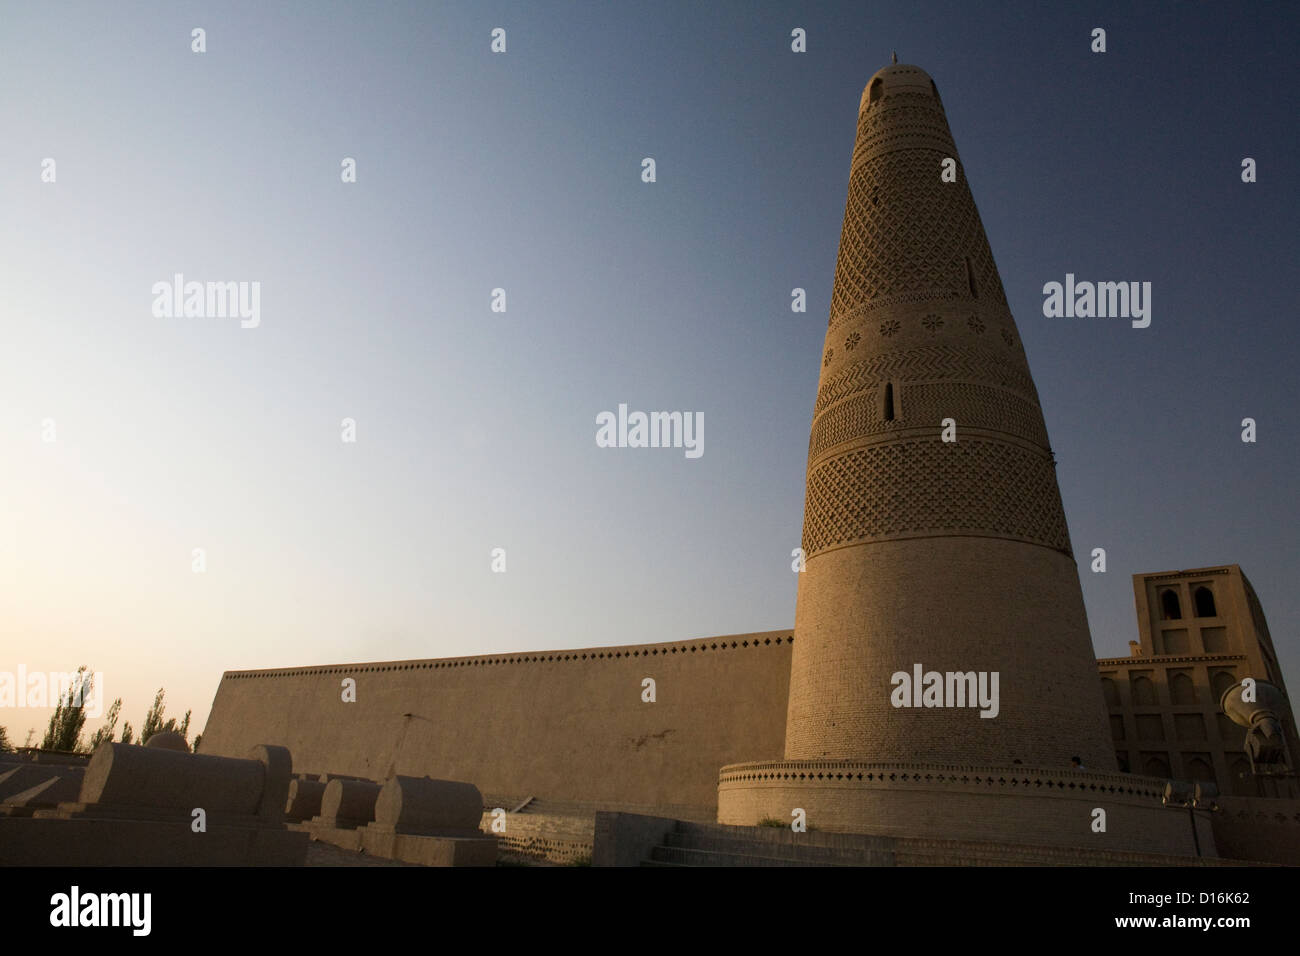 The Sugong Minaret, Imin Minaret near Turfan along the silkroad is the tallest minaret in Xinjiang Province (144 ft), China Stock Photo